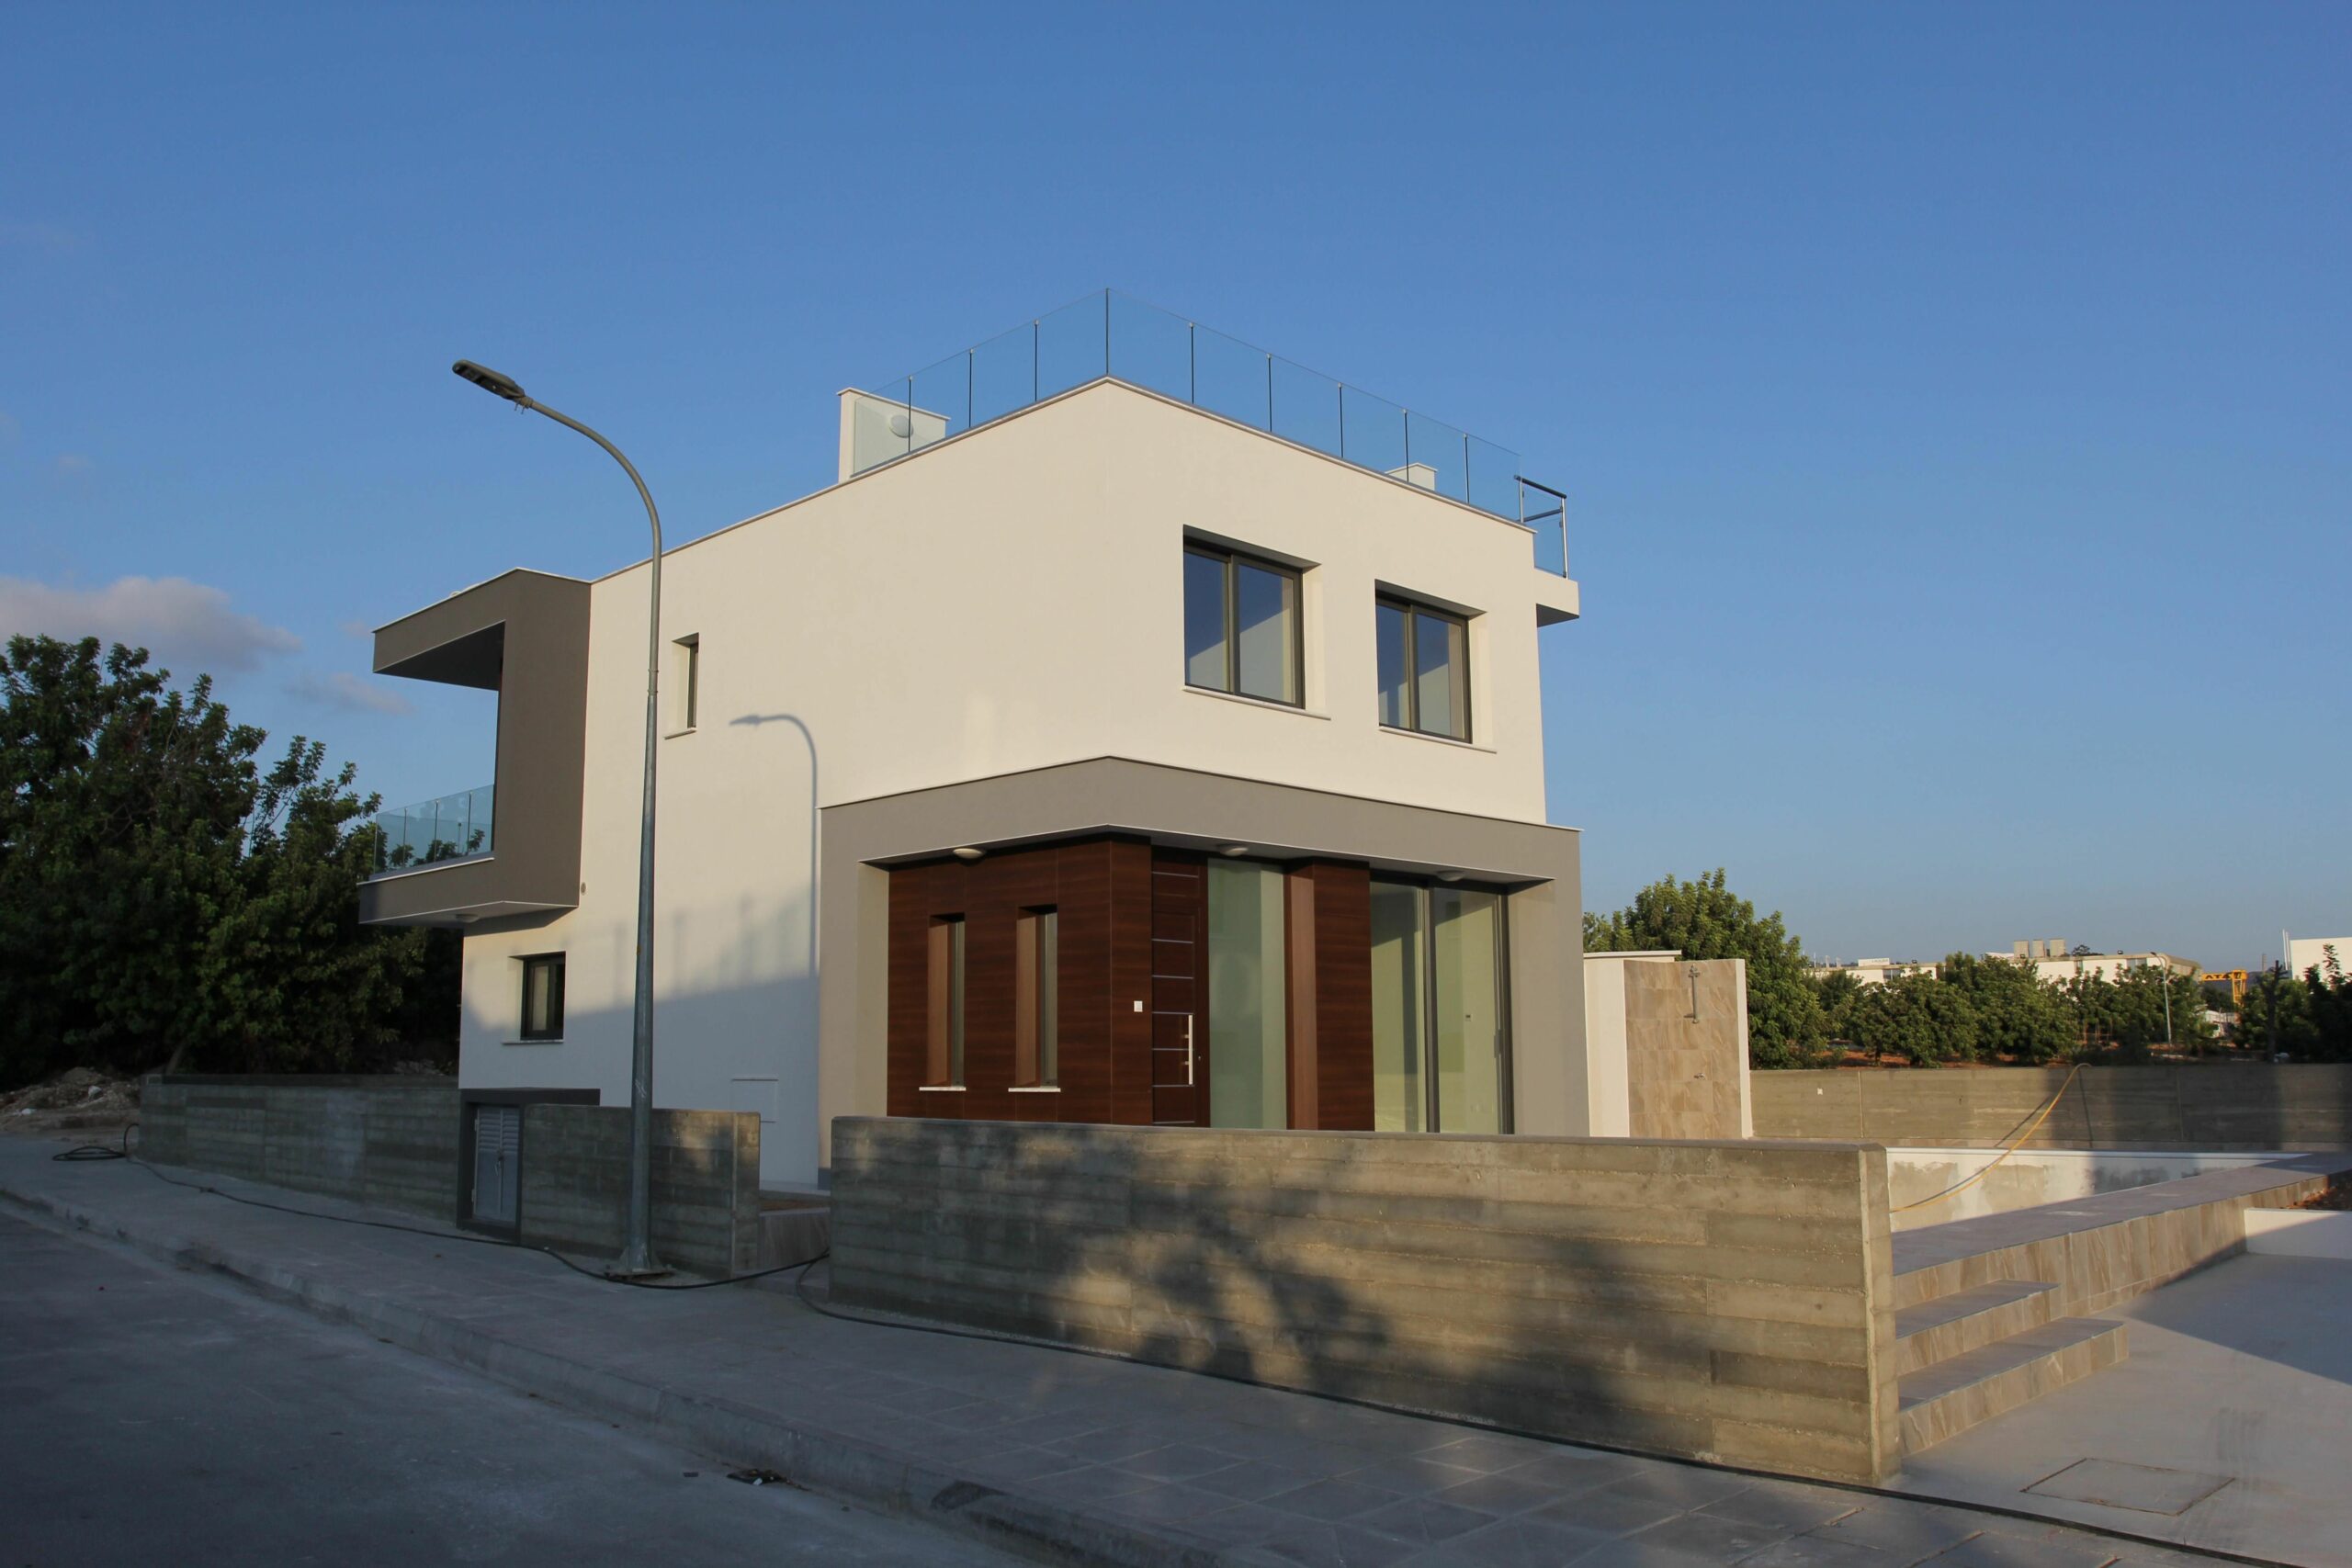 3 Bedroom House for Sale in Mesogi, Paphos District